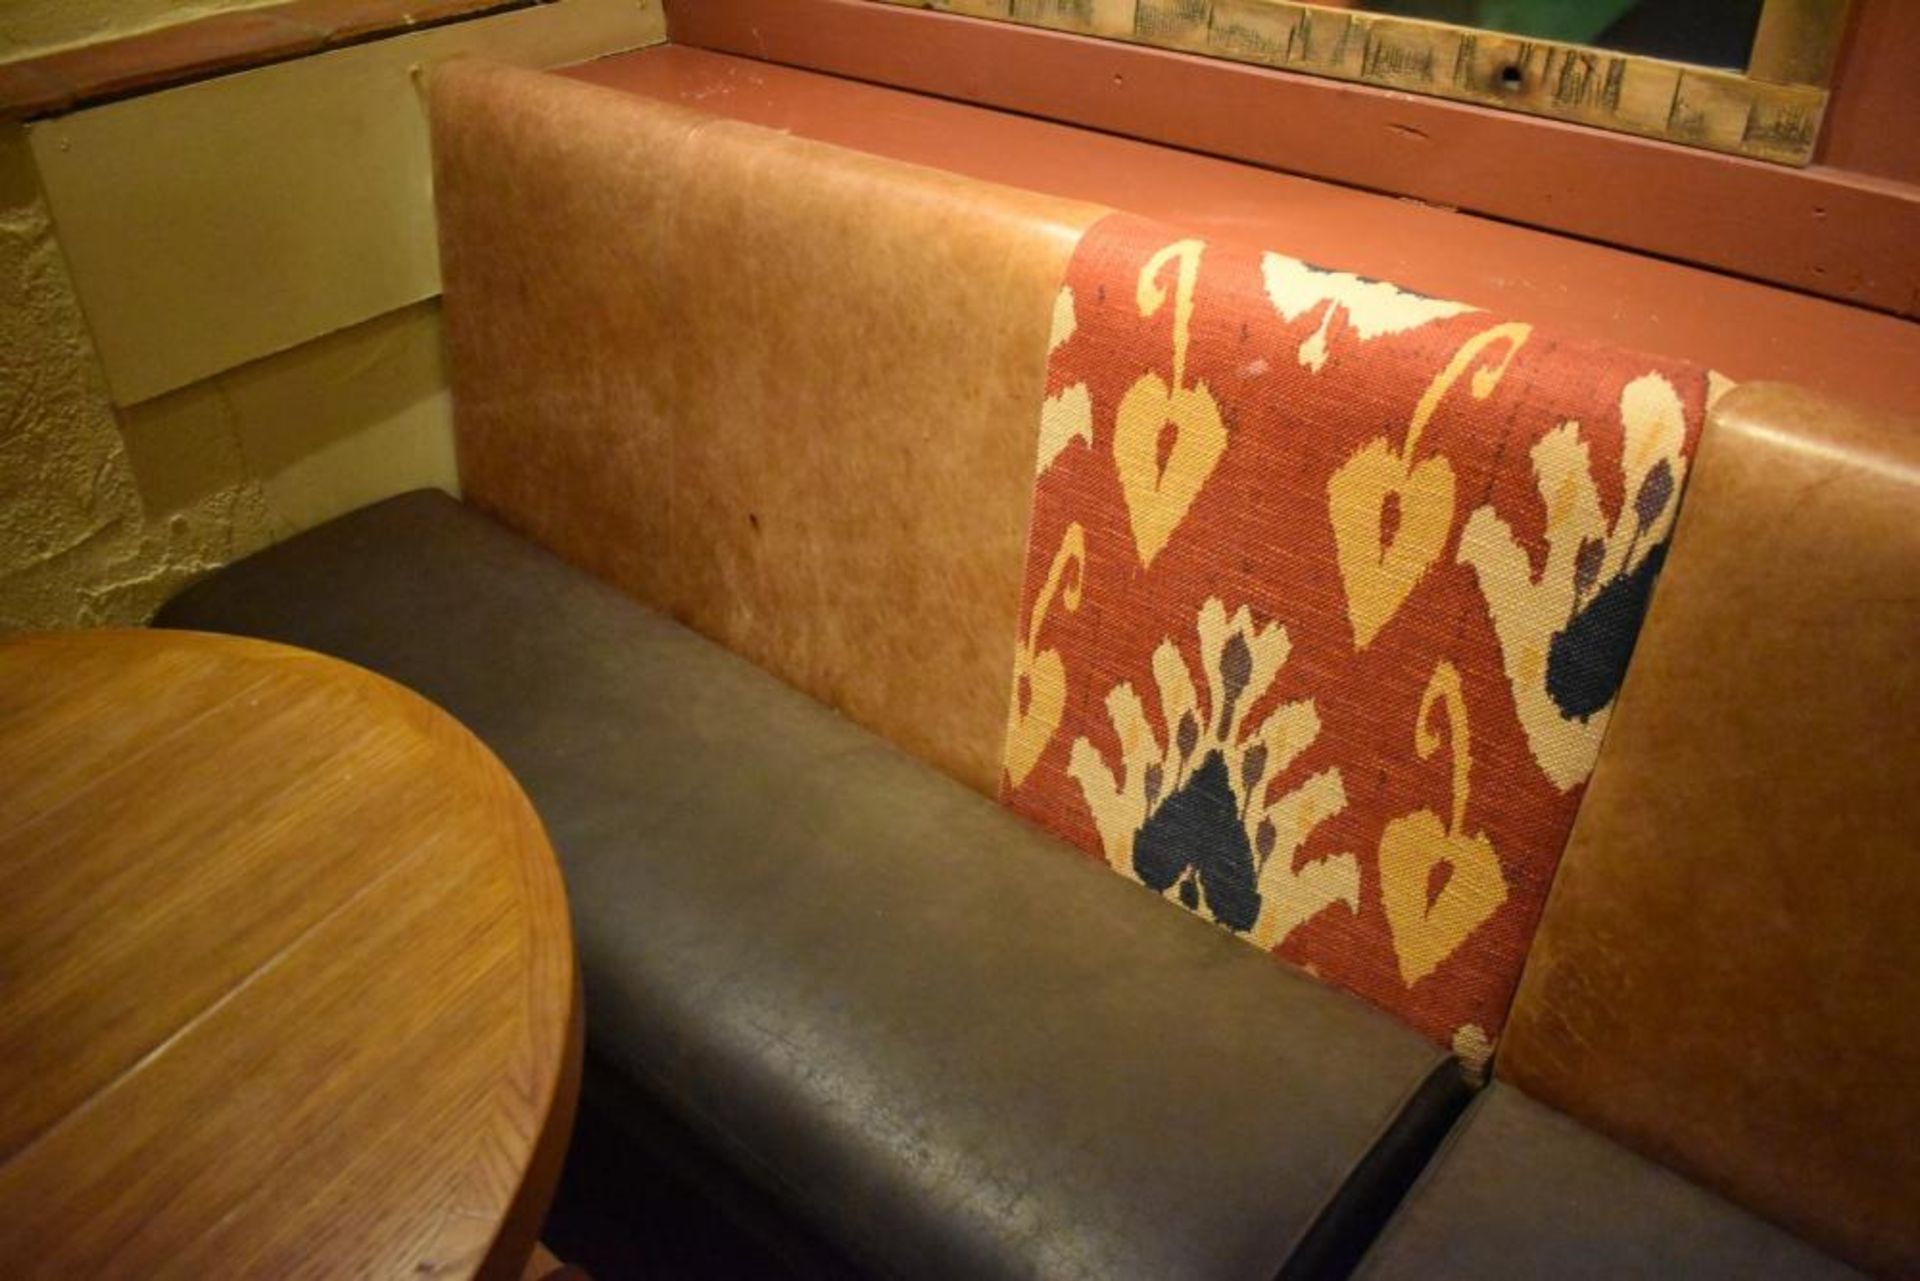 1 x Long Seating Bench From Mexican Themed Restaurant - CL461 - Ref PR889 - Location: London W3 - Image 4 of 7